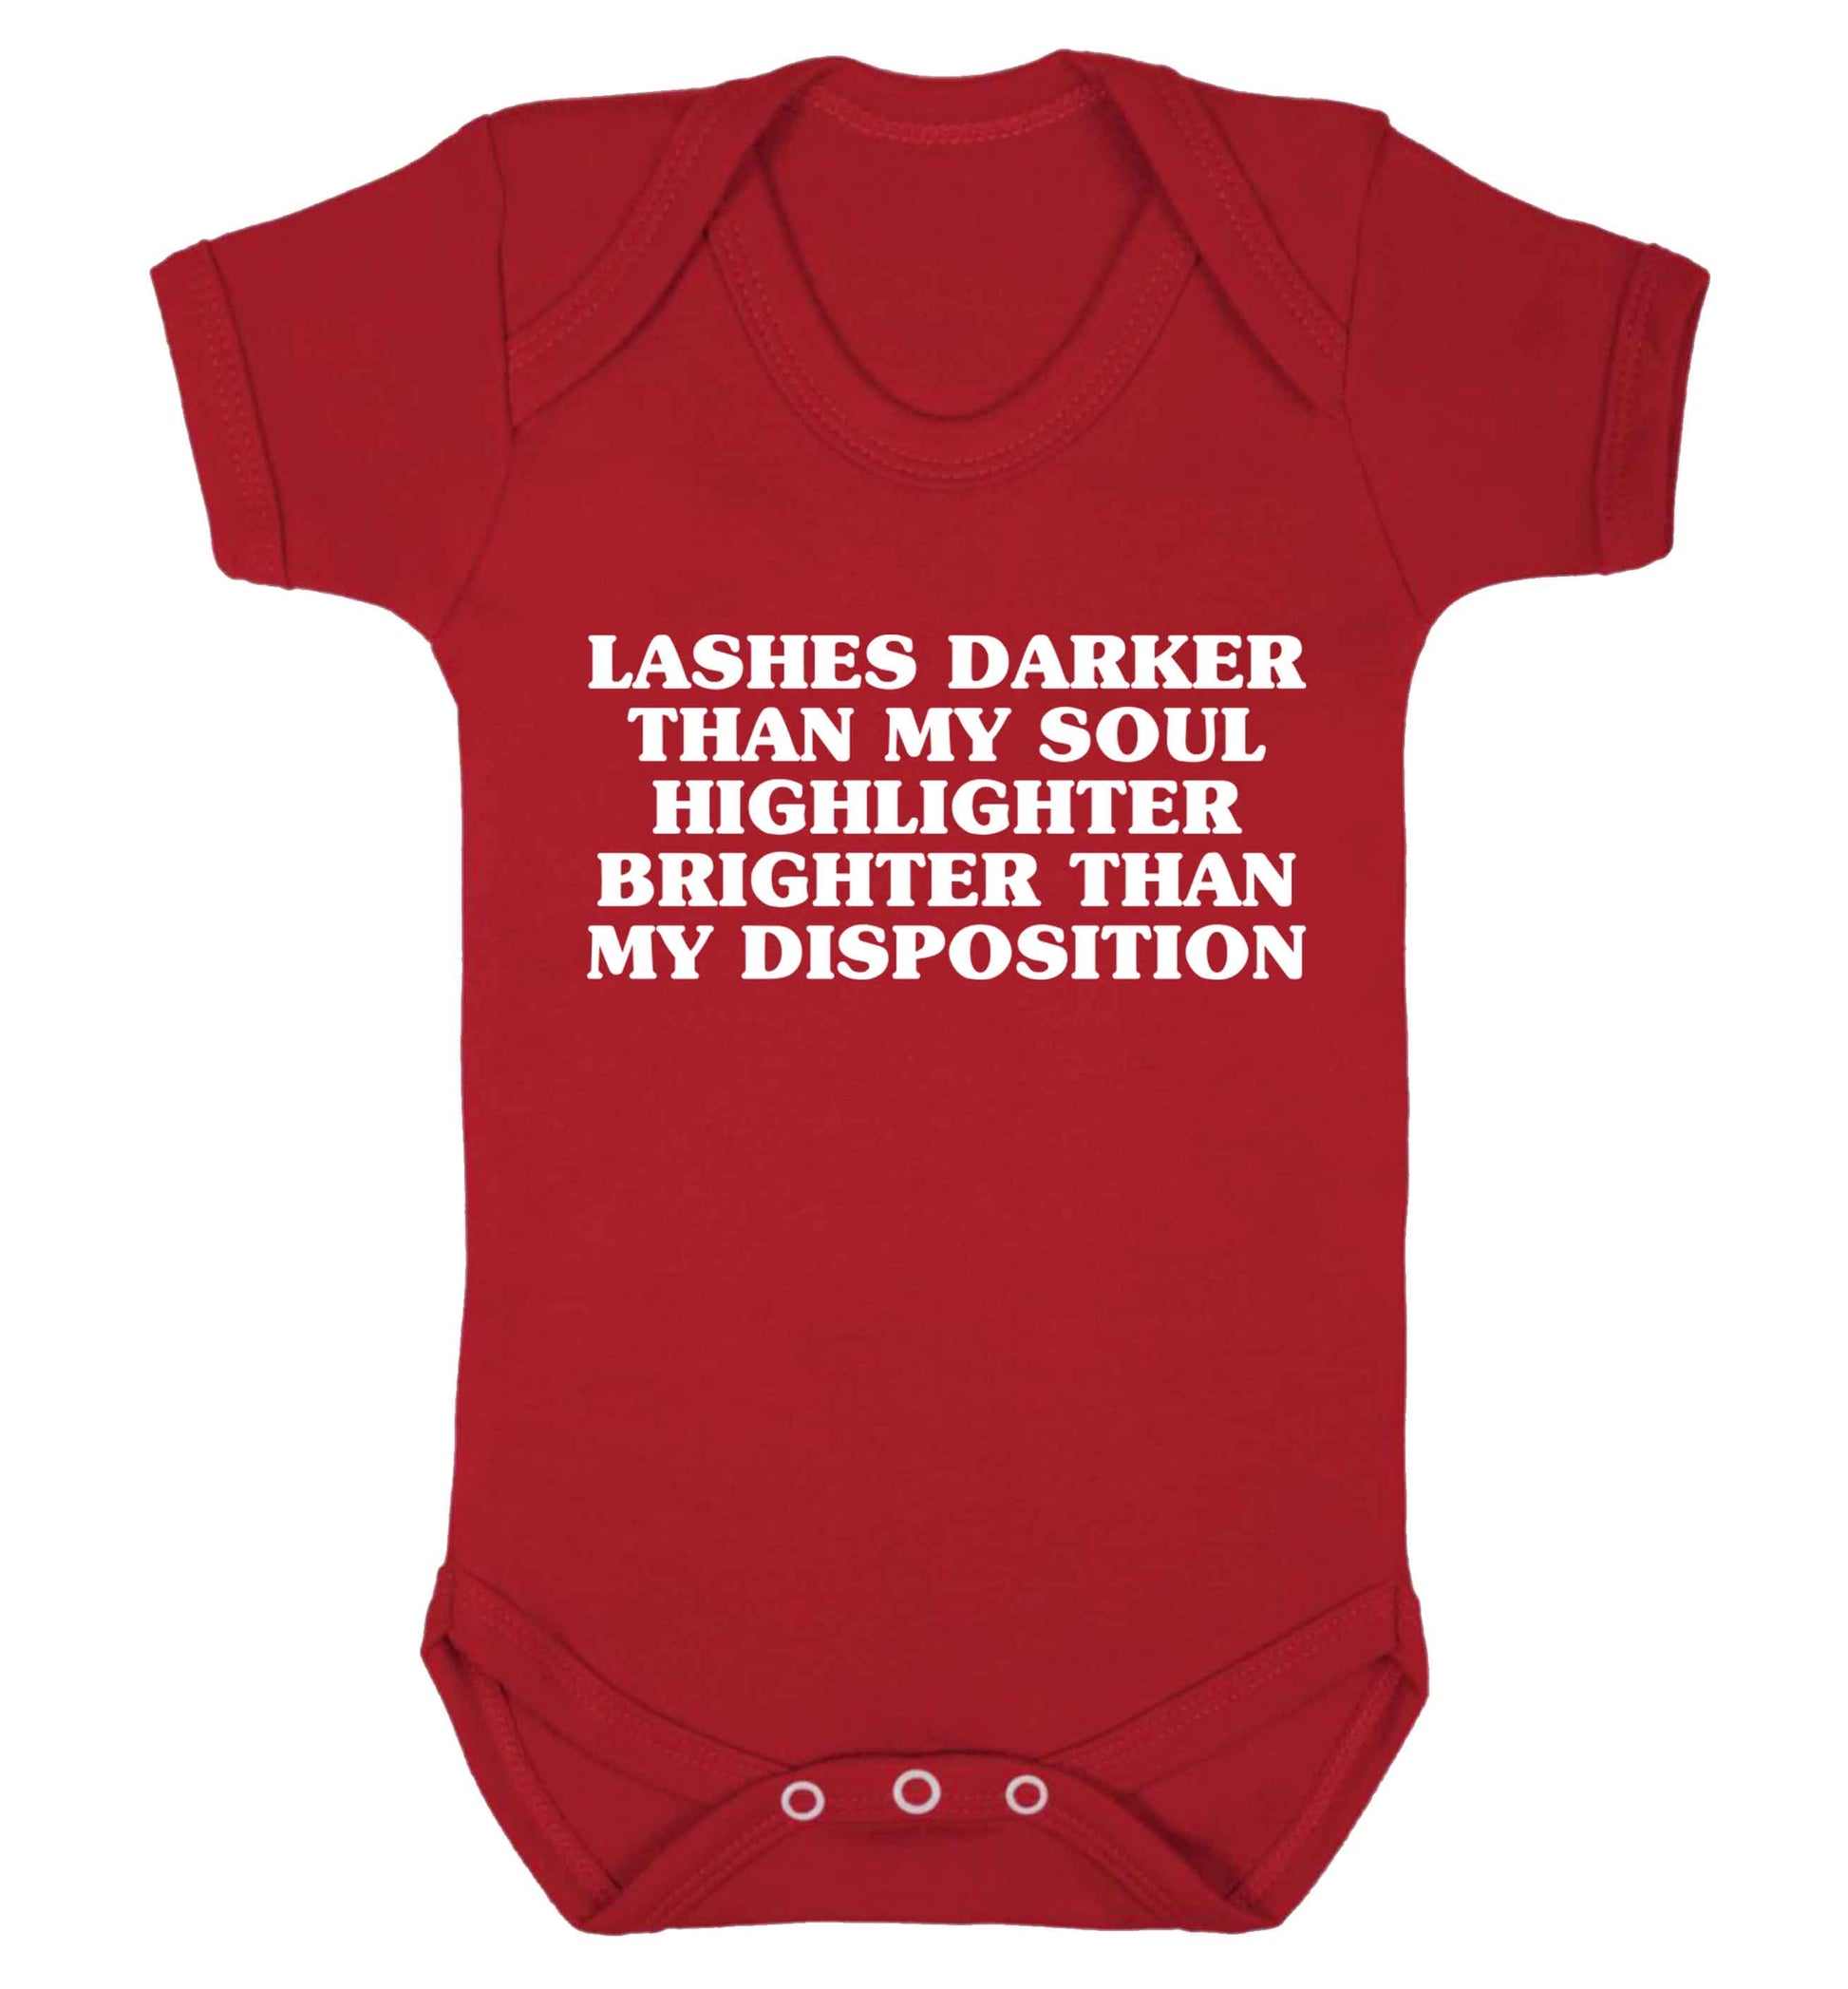 Lashes darker than my soul, highlighter brighter than my disposition Baby Vest red 18-24 months